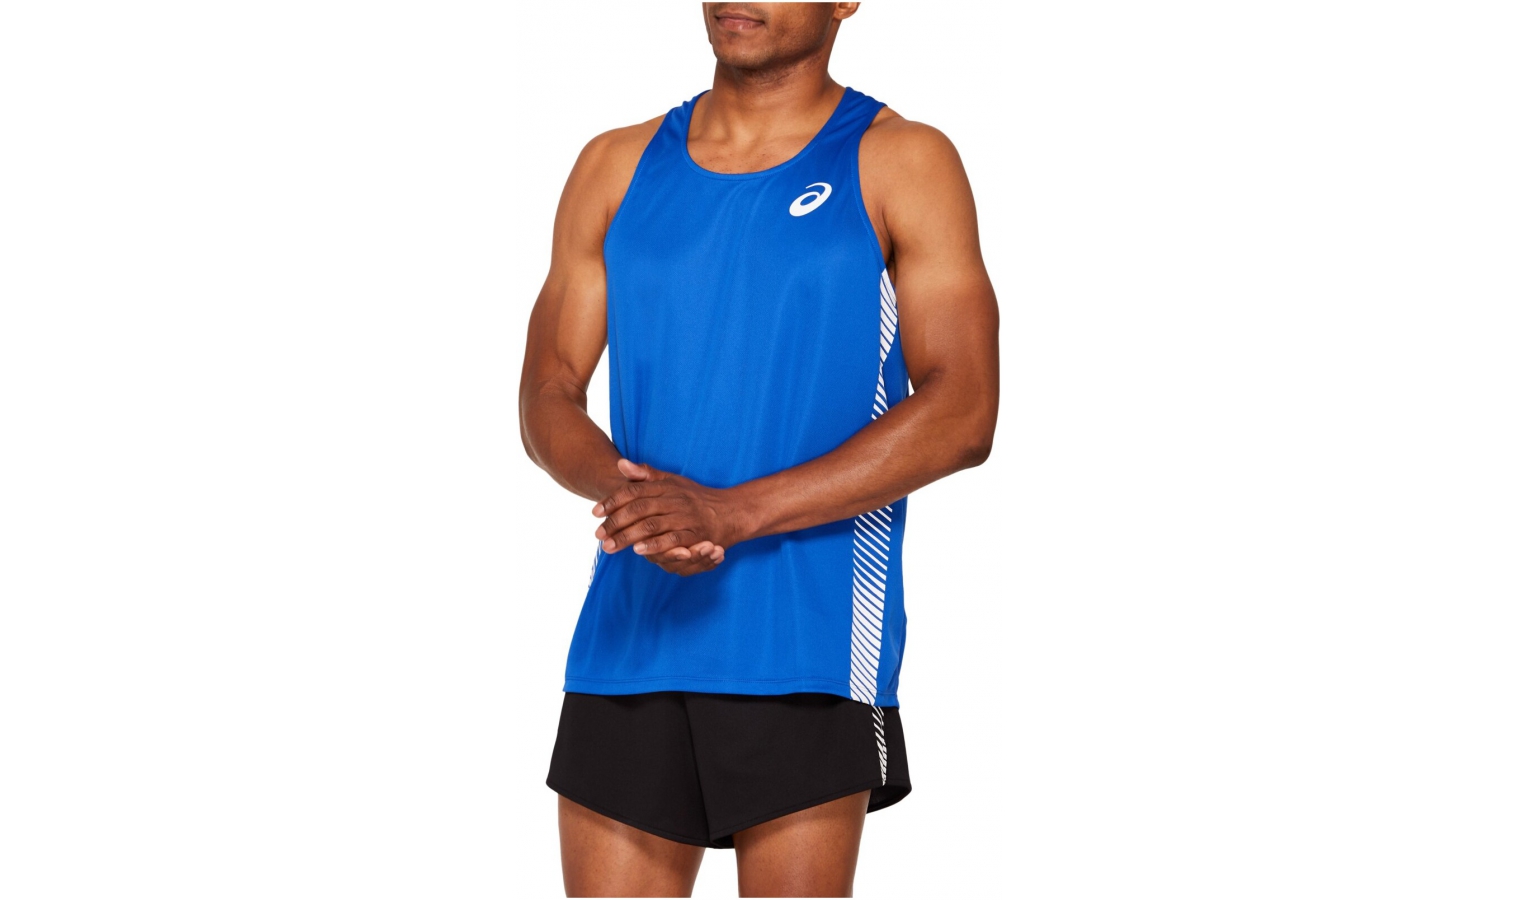 Mens functional tank top Asics M PRACTICE SNG blue | AD Sport.store